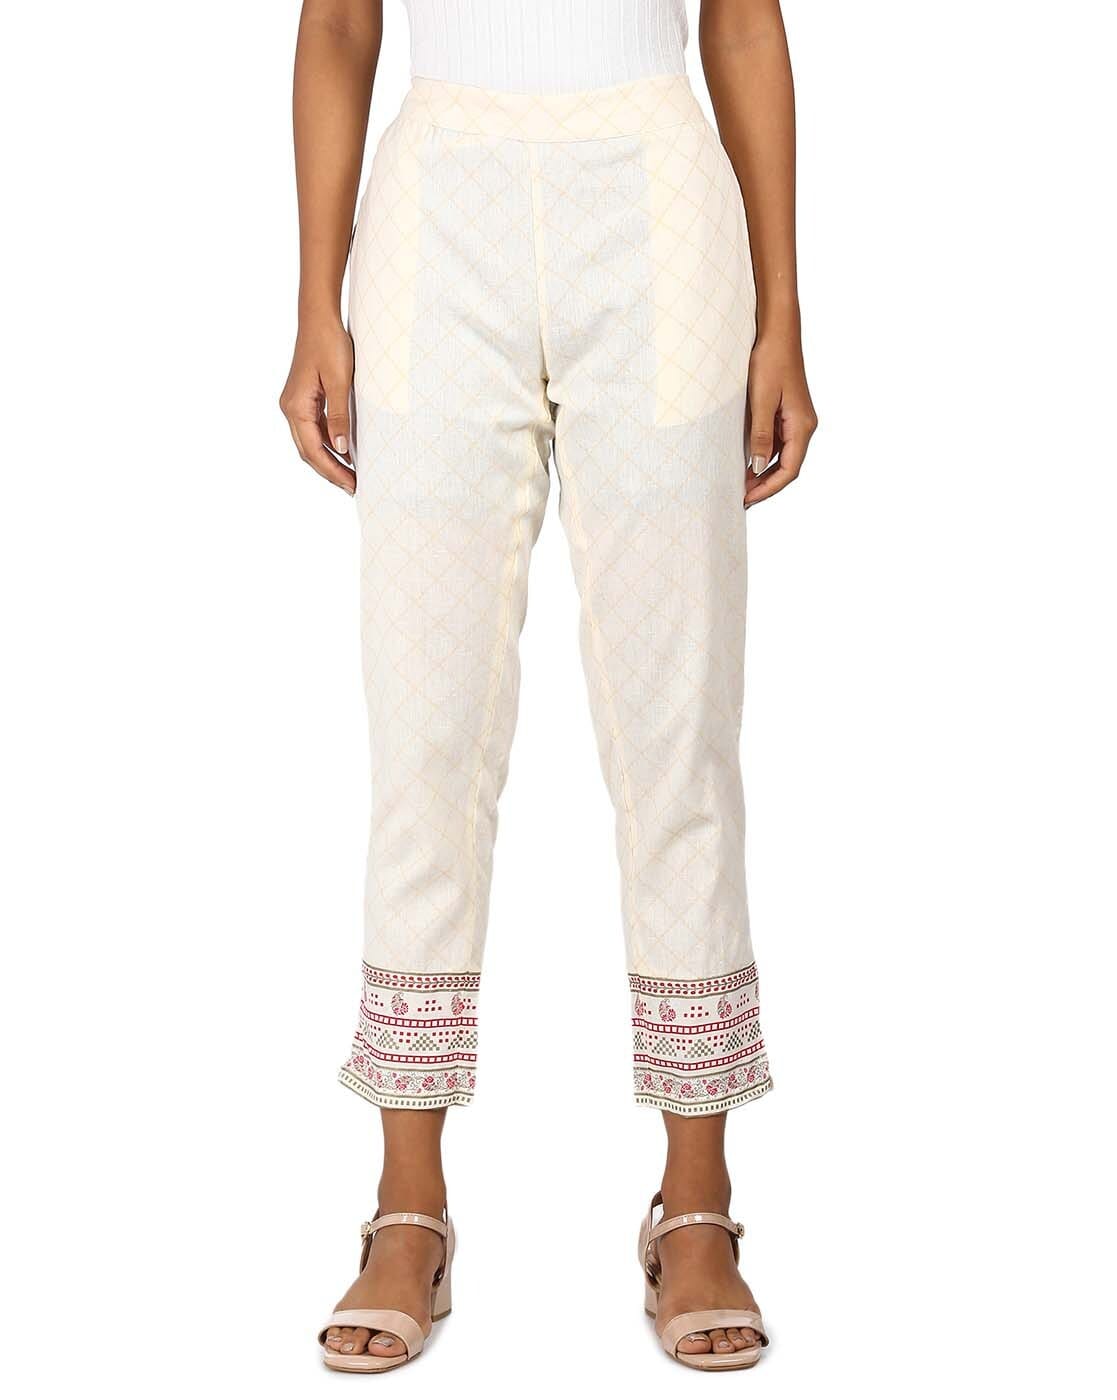 Women Off White Solid Trouser